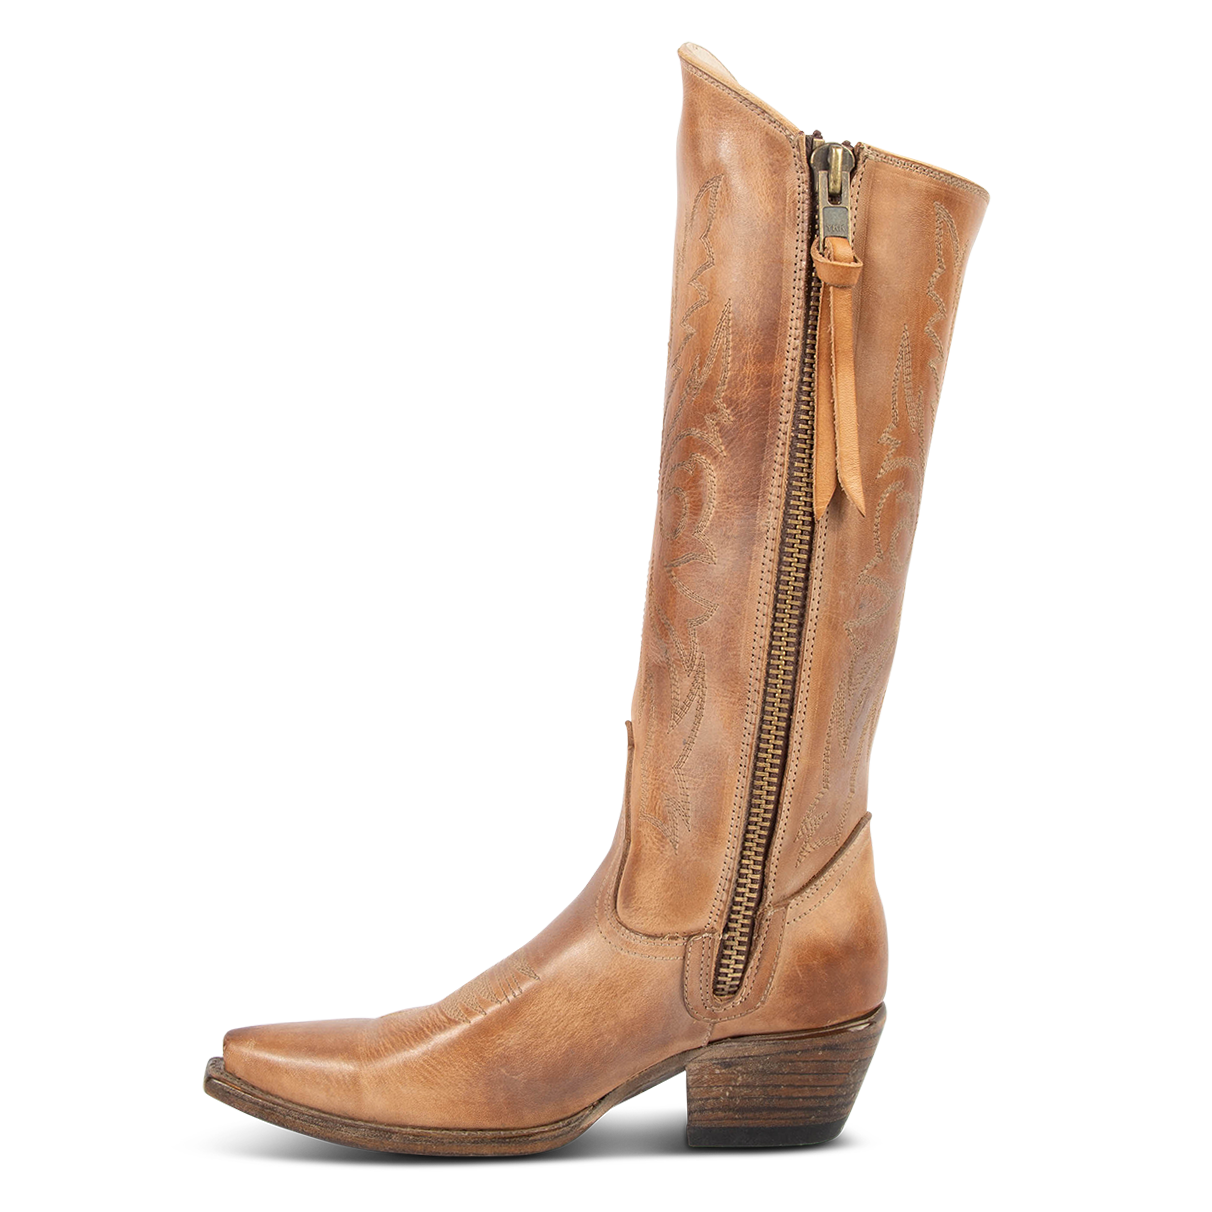 Inside view showing inside zip closure on FREEBIRD women's Wolfgang taupe tall western boot